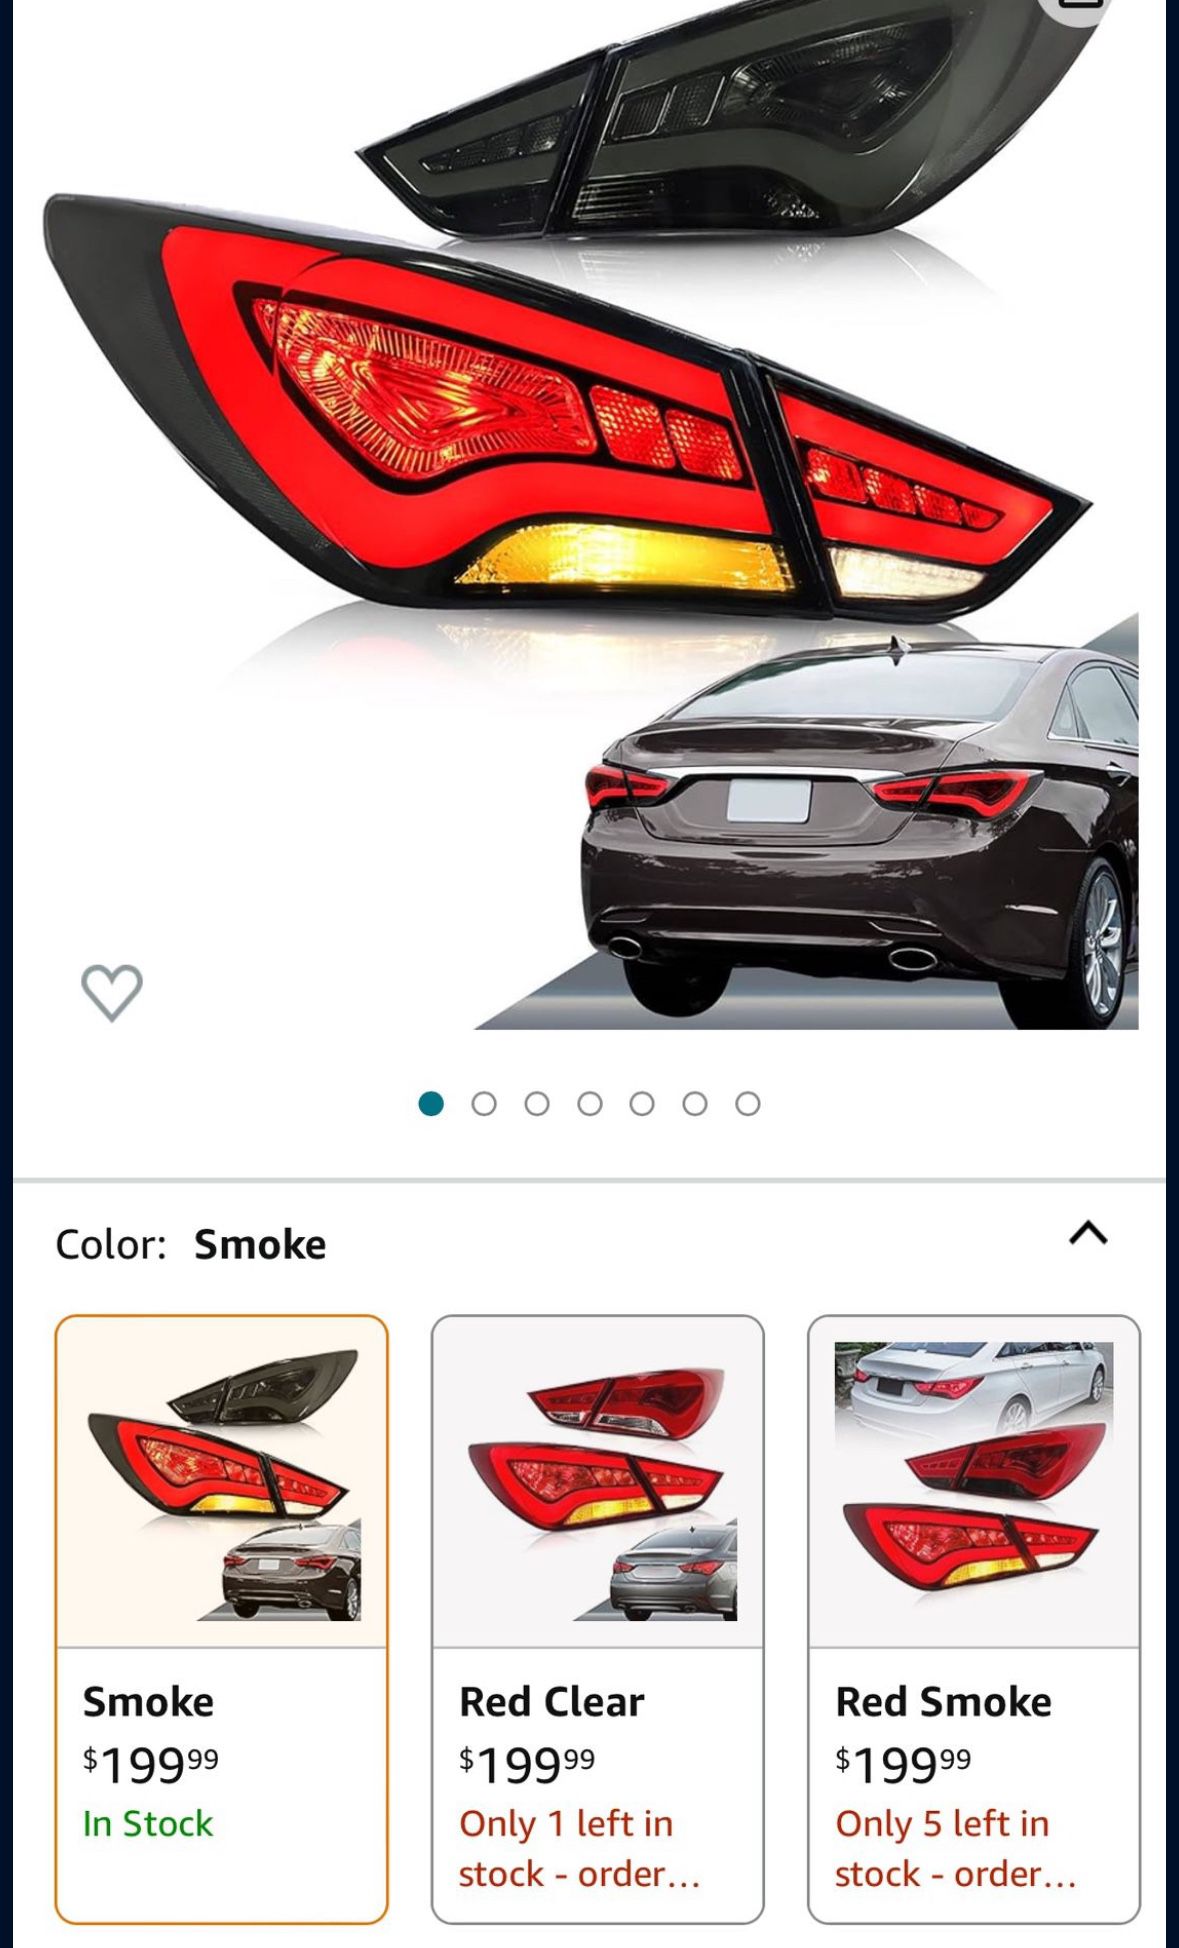 VLAND LED Tail lights for Hyundai Sonata 2011 2012 2013 2014(Only for US Version) (Smoke)